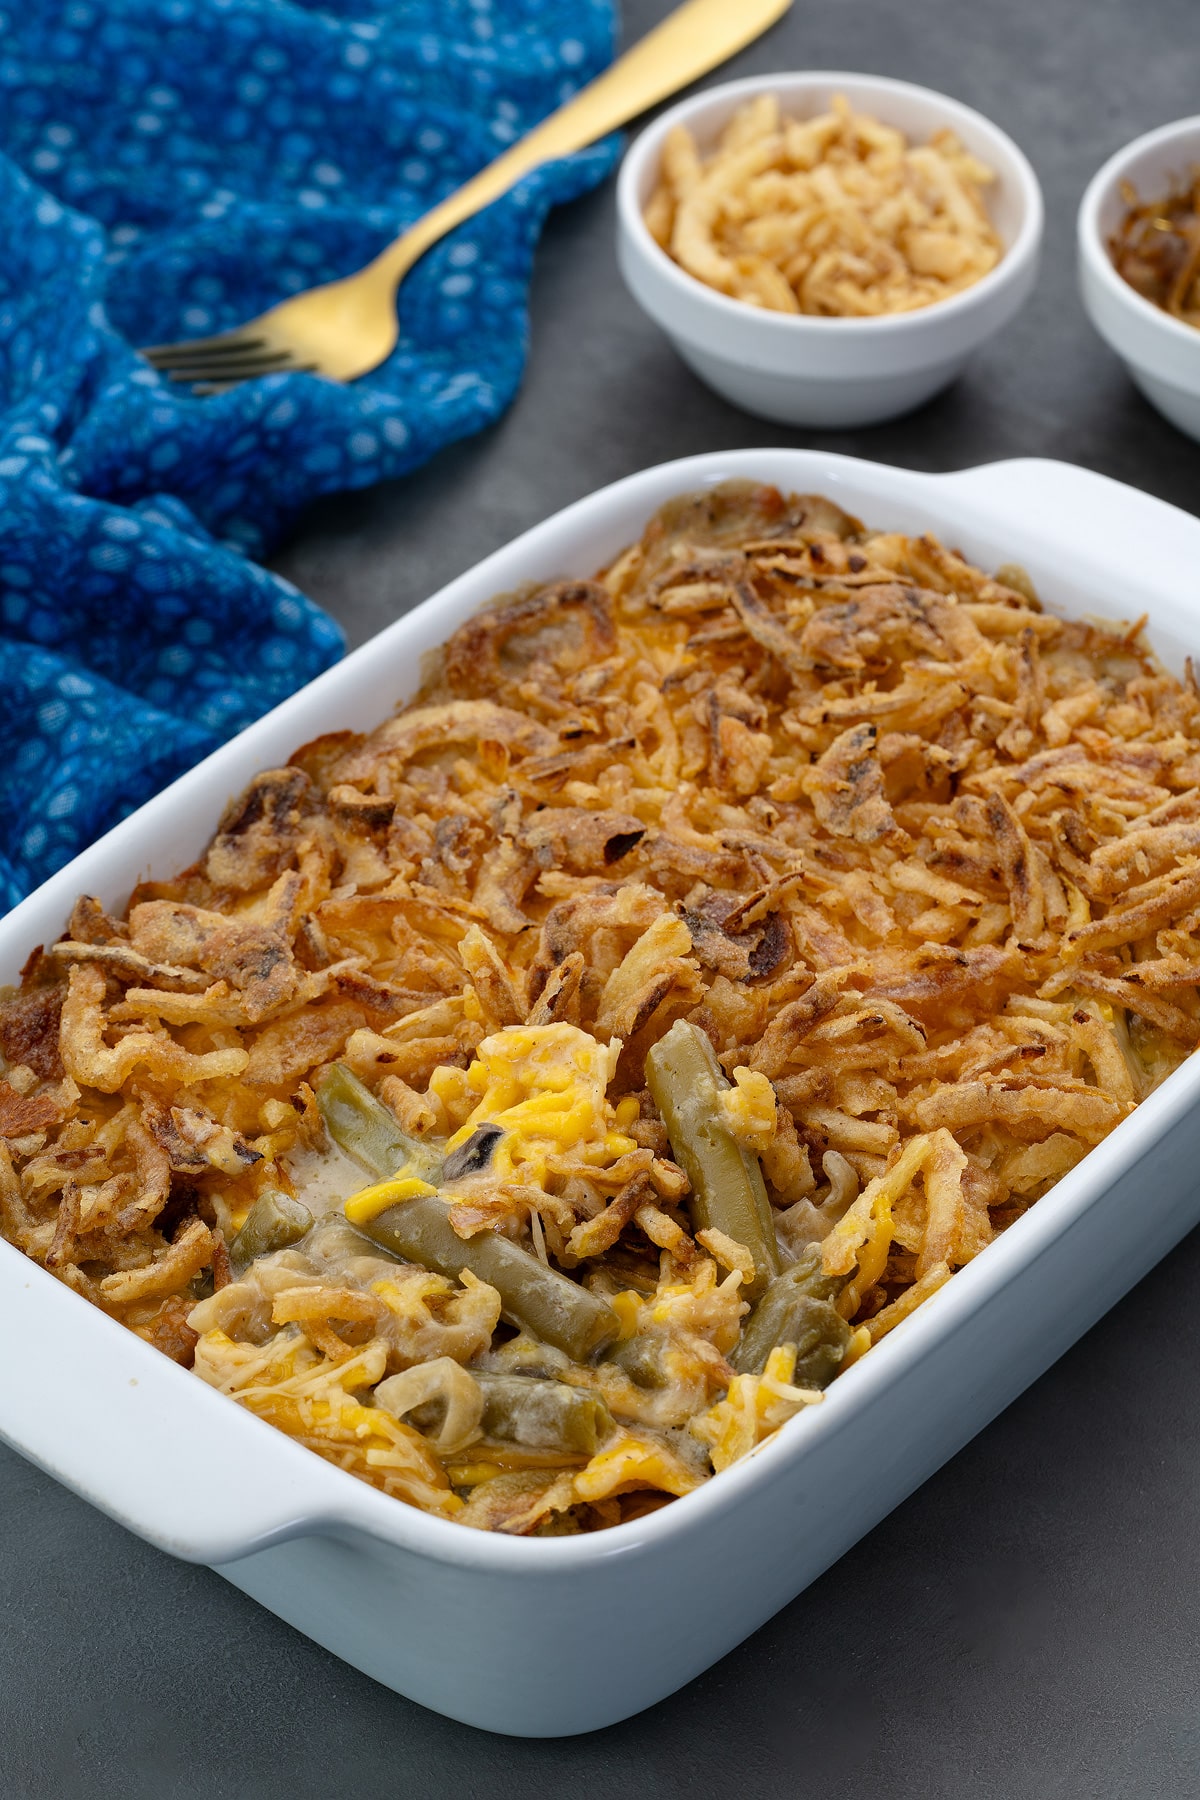 Homemade Green Bean Casserole in a white baking dish on a grey table, accompanied by French-fried onions, caramelized onions in cups, a blue towel, and a golden spoon nearby.